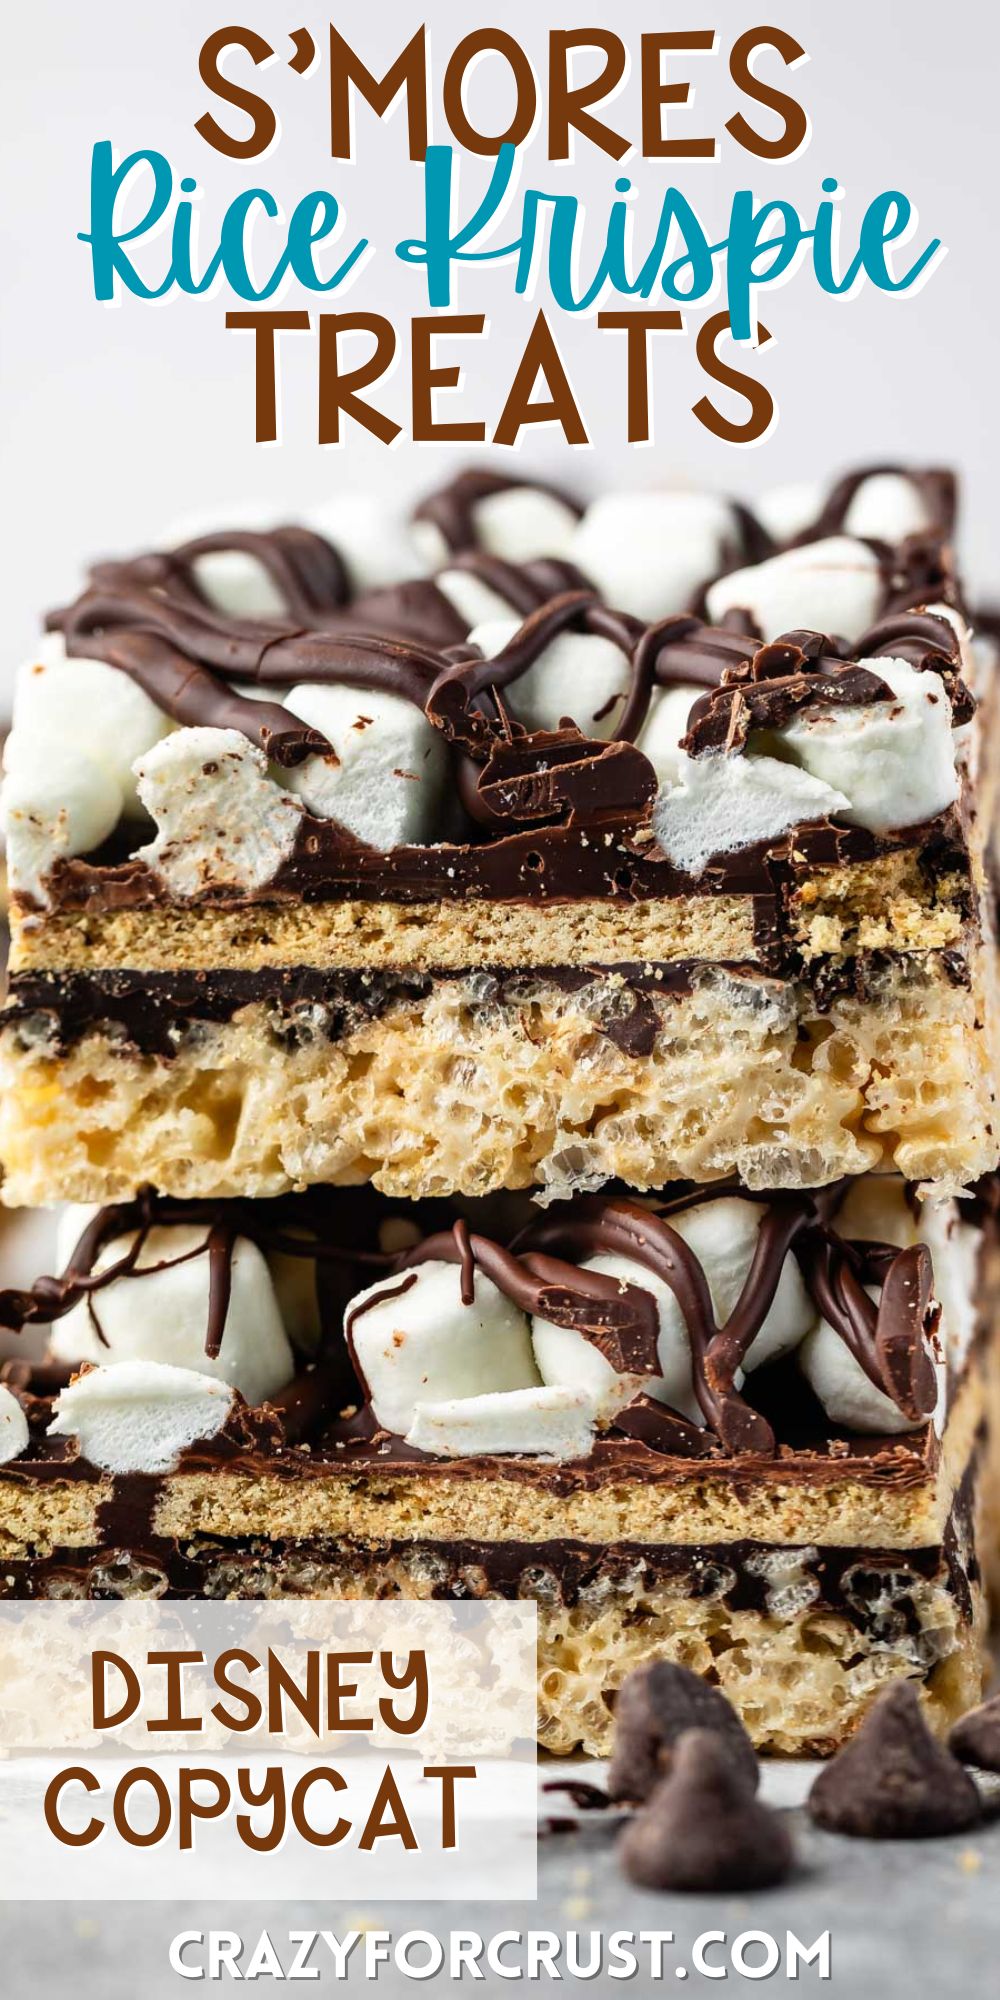 stacked Rice Krispie treats with marshmallows and chocolate on top with words on the image.